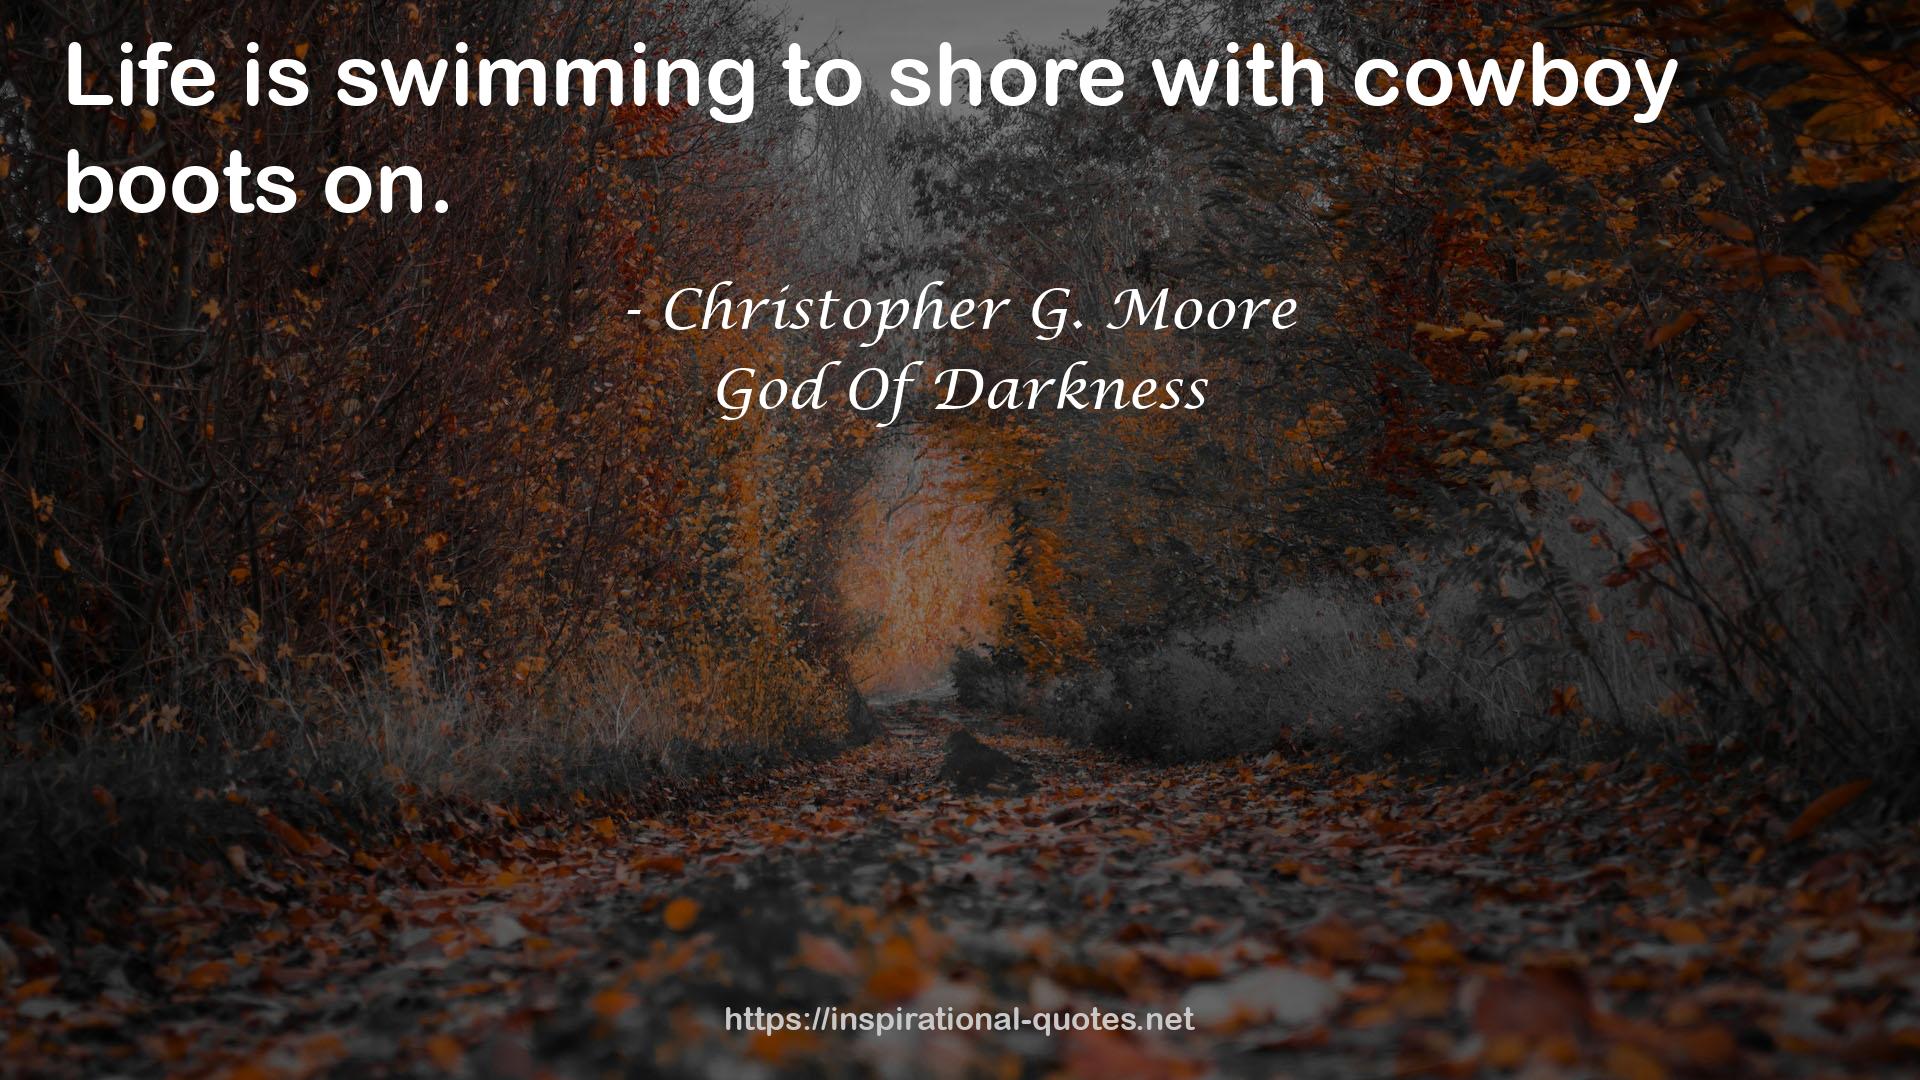 Christopher G. Moore QUOTES